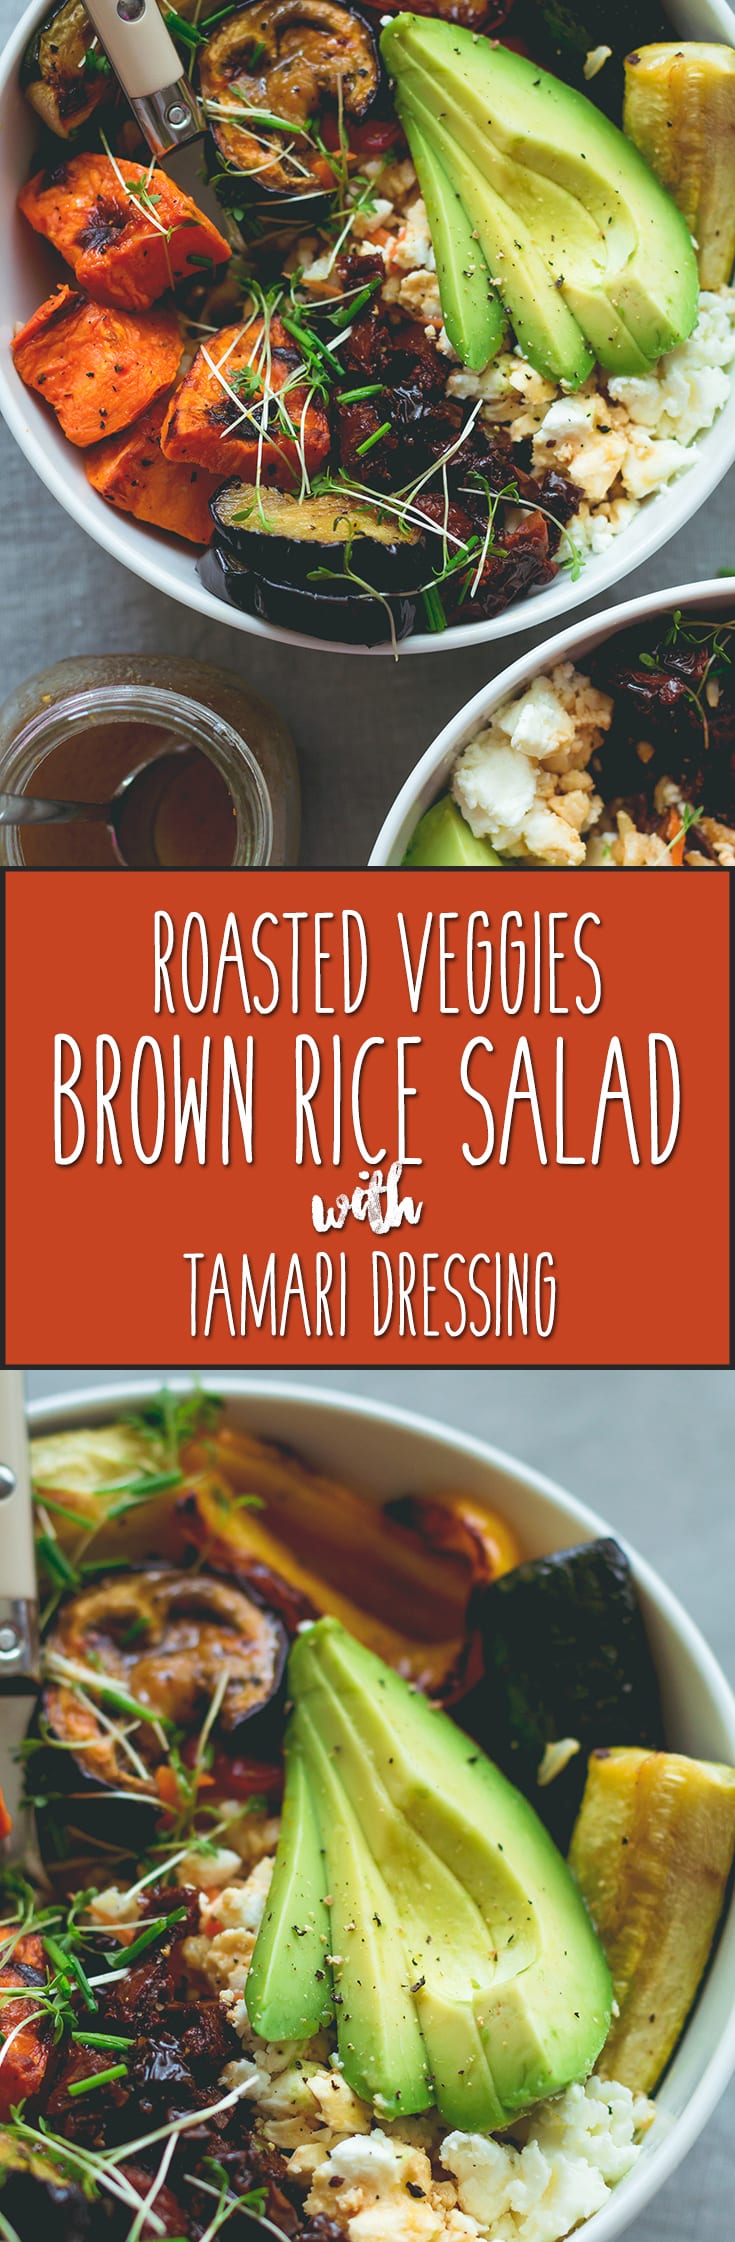 Brown Rice Salad Bowl with Roasted Veggies & Tamari Dressing - not your average boring salad! Roasted veggies, sweet potatoes, brown rice, lettuce, sundried tomatoes, goats cheese, and avocado with sweet & sour tamari dressing. Easy to make and absolutely scrumptious! | thehealthfulideas.com